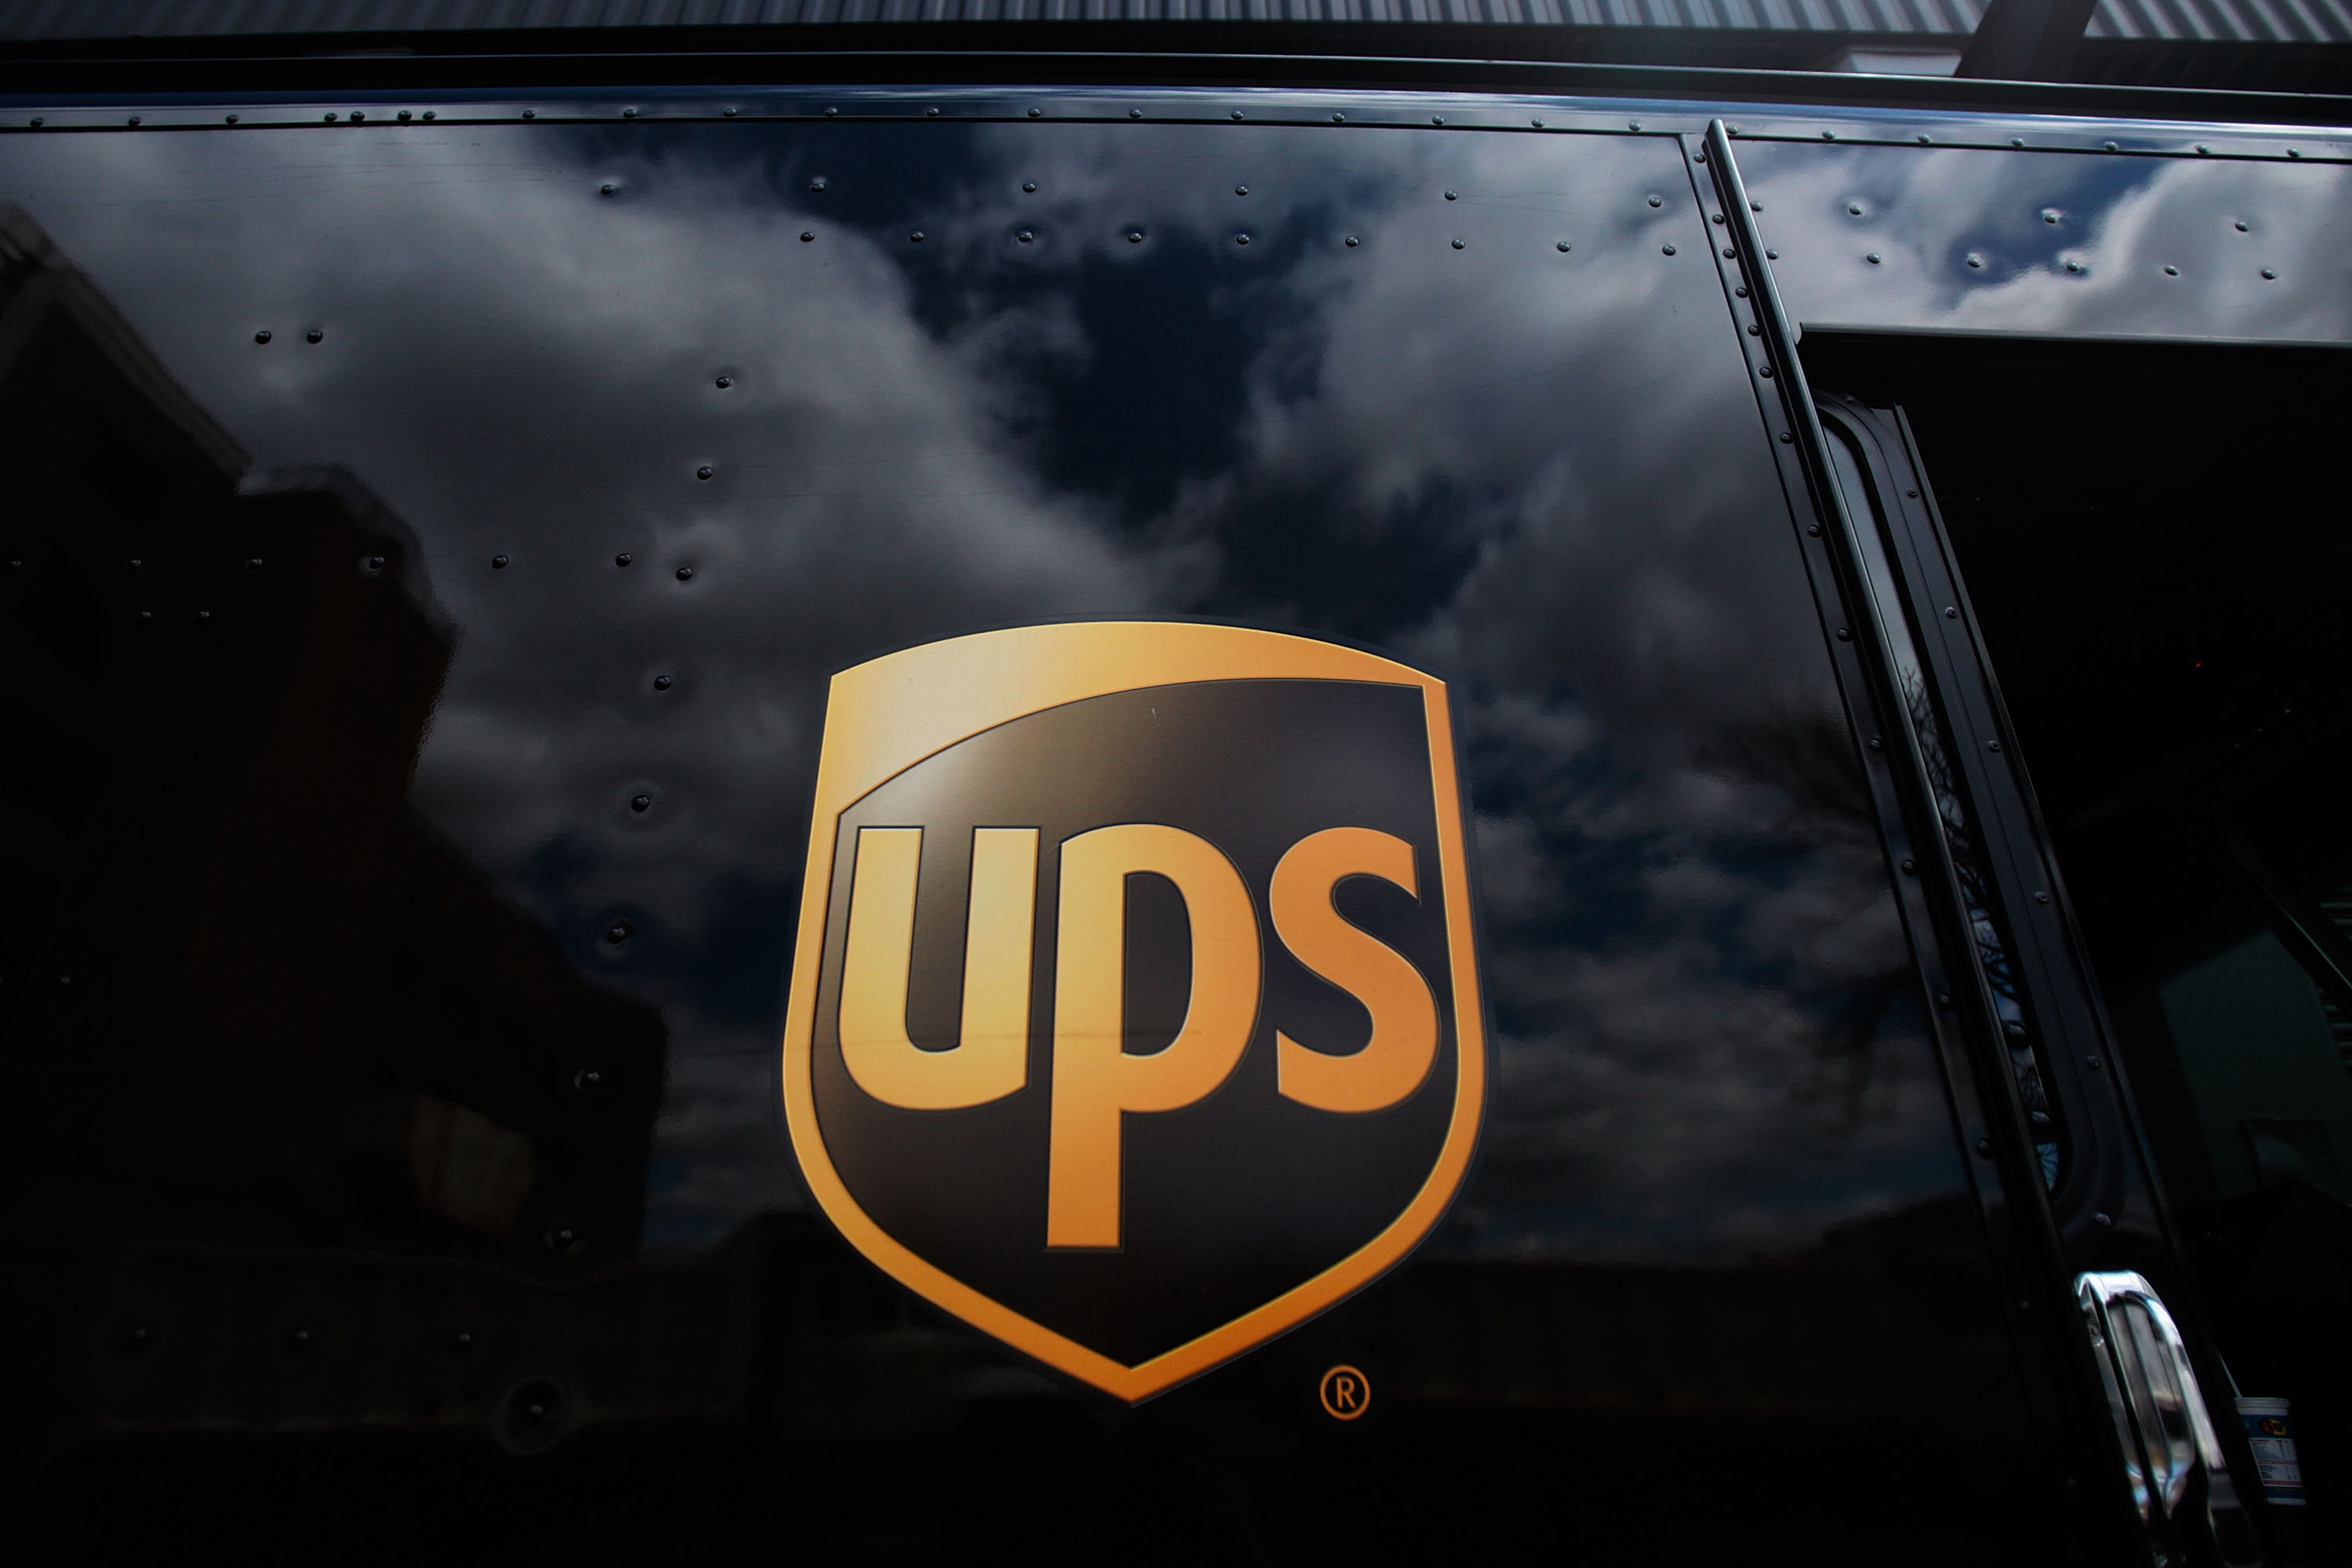 The United Parcel Service logo on the side of a delivery truck on April 23, 2009 in New York City. 